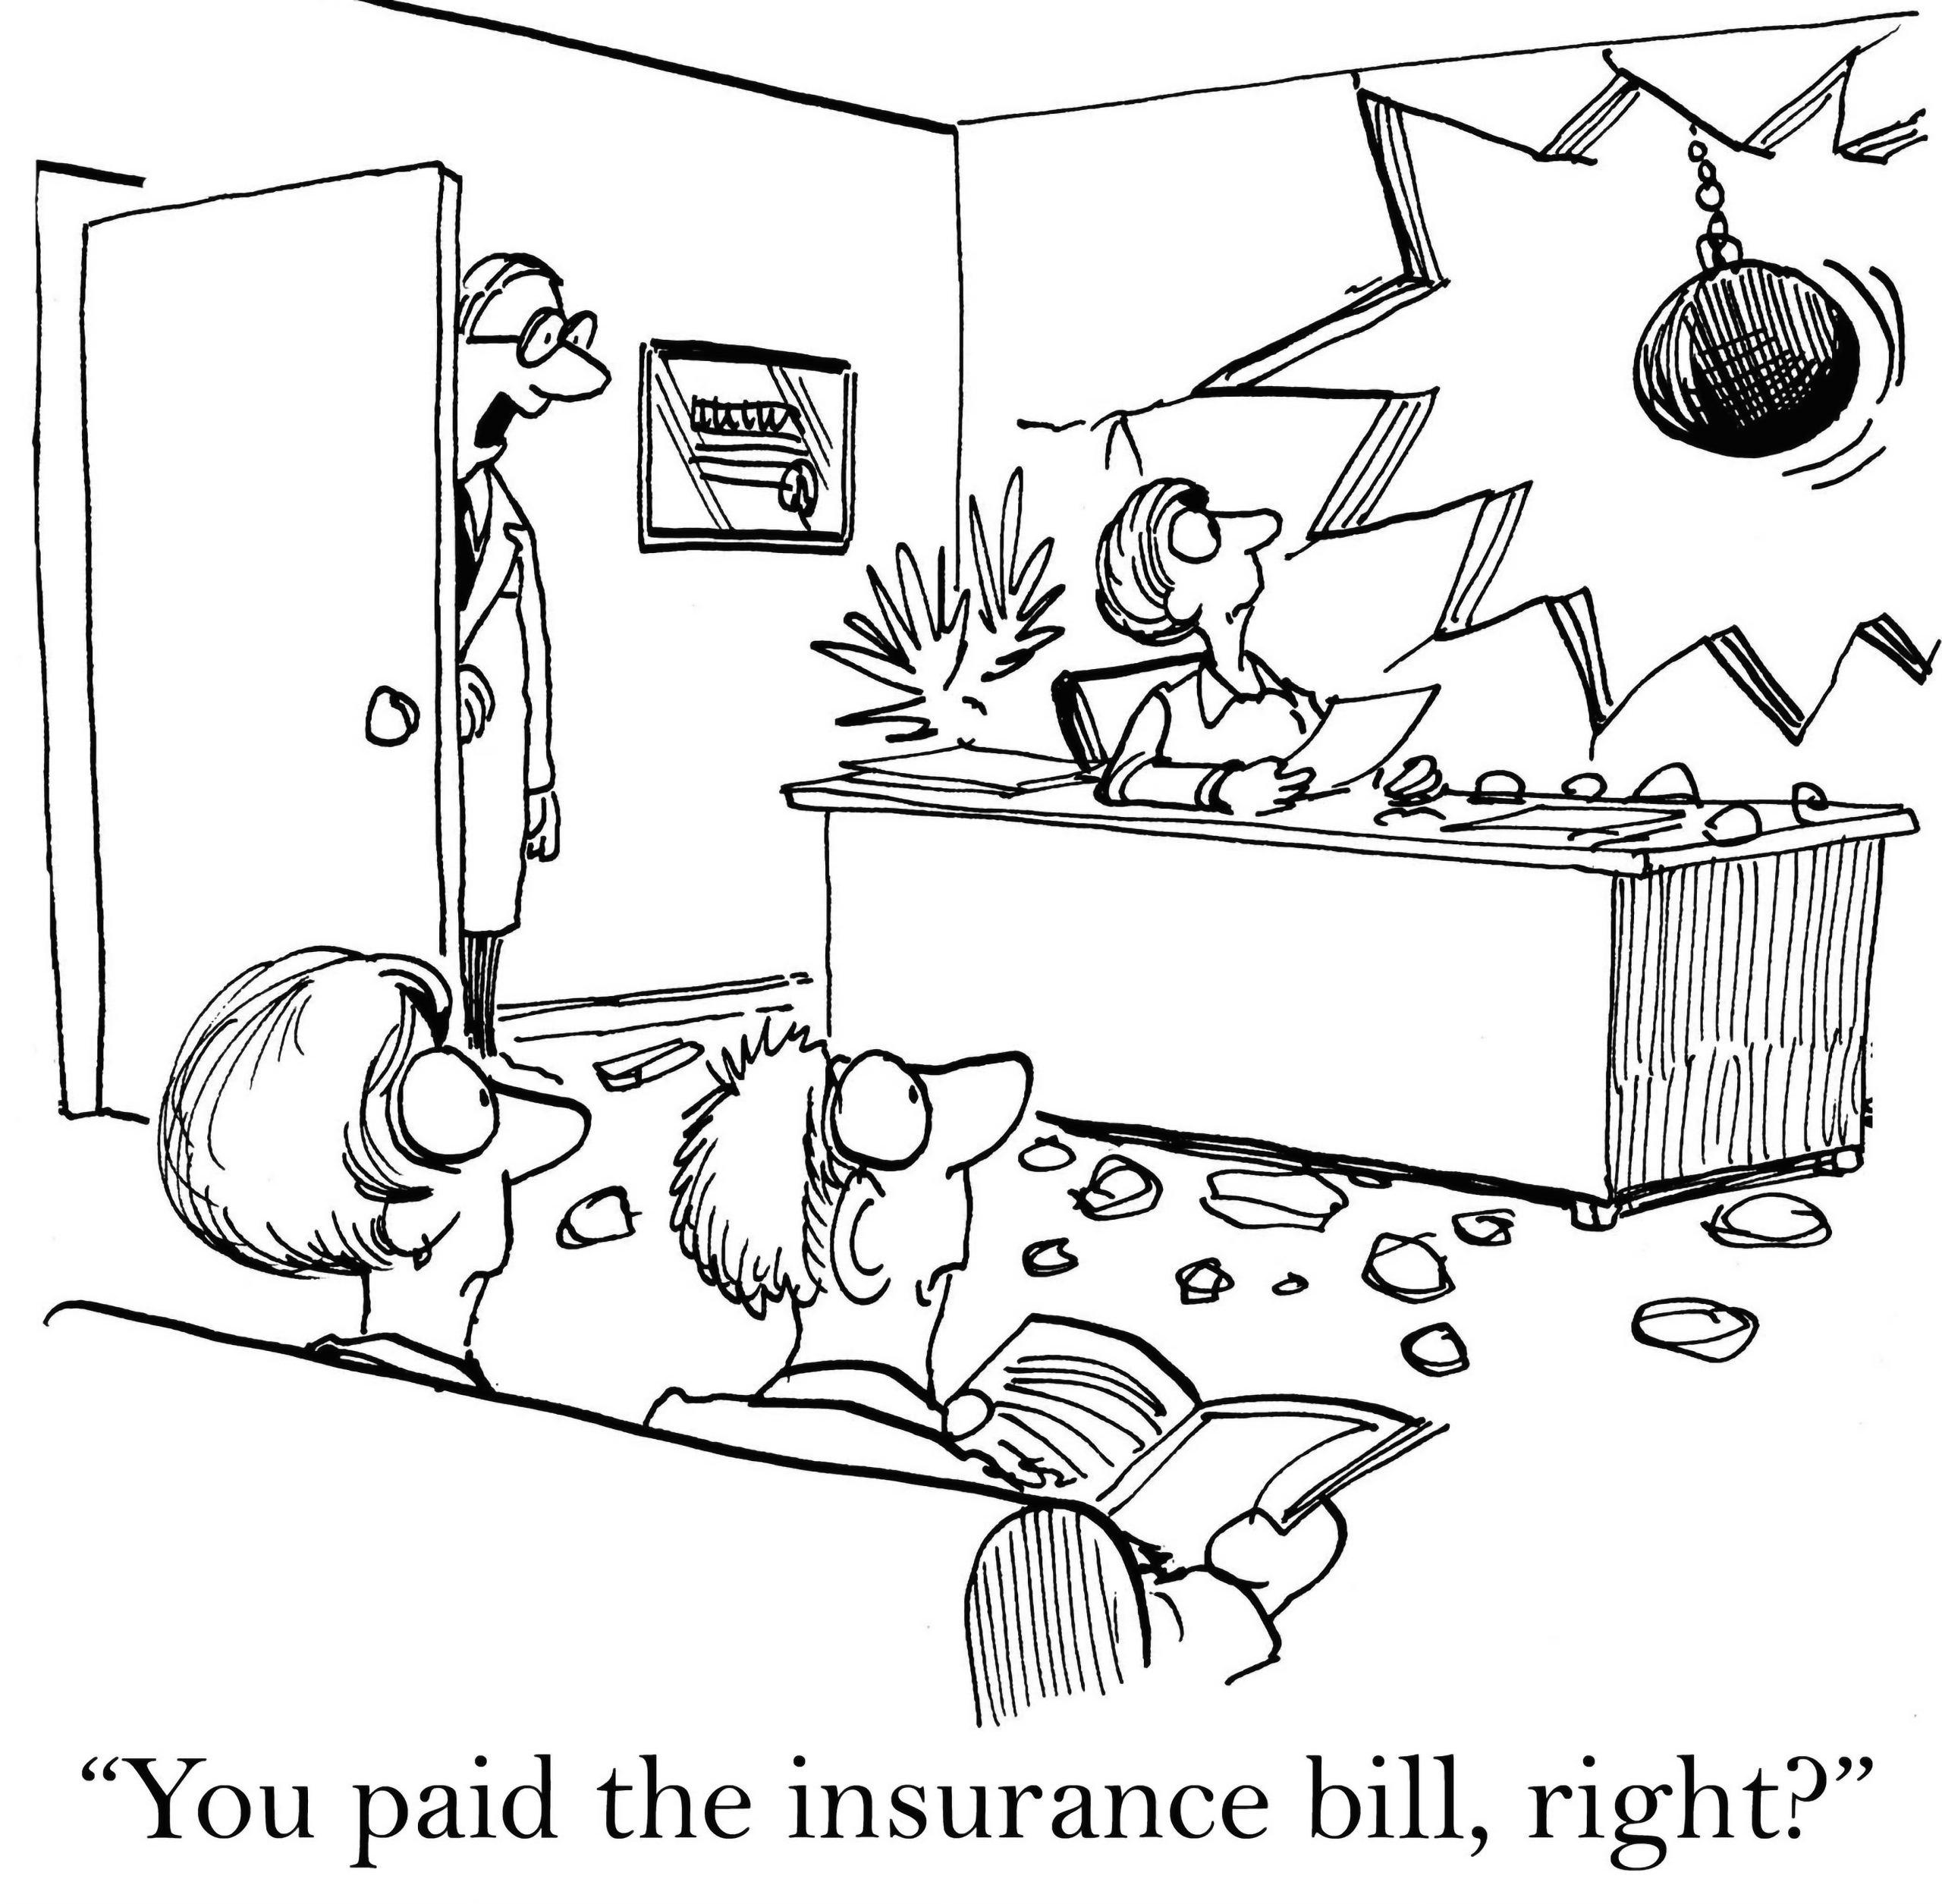 did you pay the insurance?